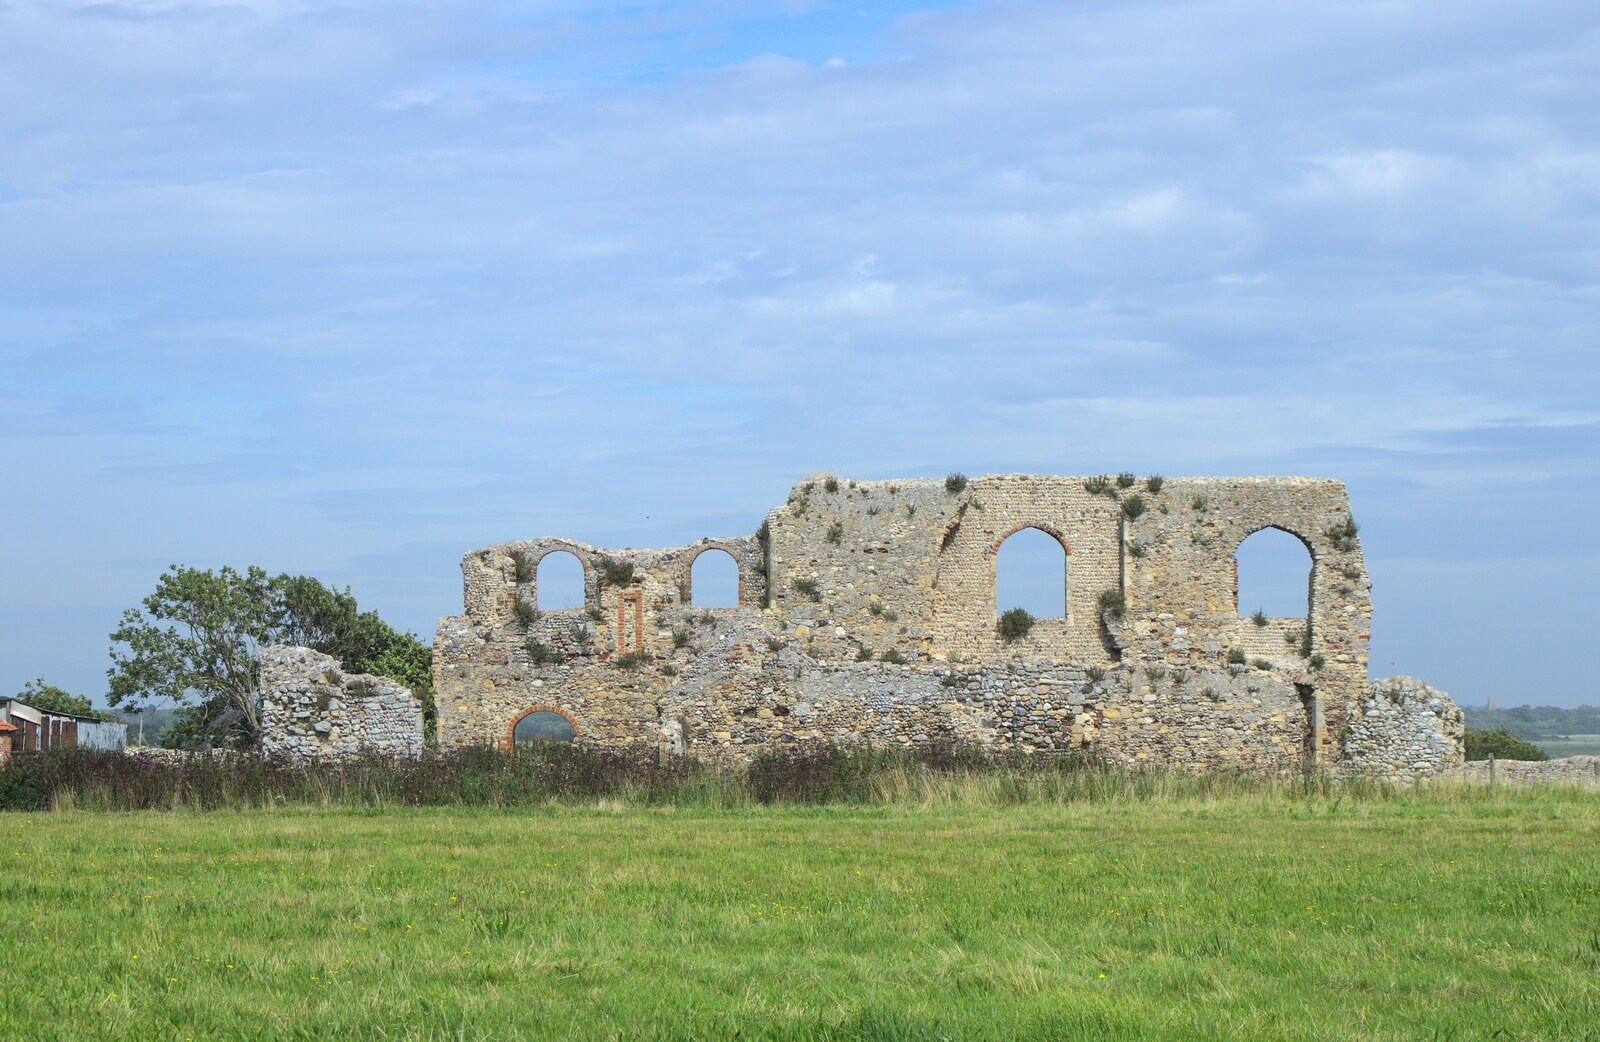 The ruins of Dunwich Abbey from Camping by the Seaside, Cliff House, Dunwich, Suffolk - 15th August 2012